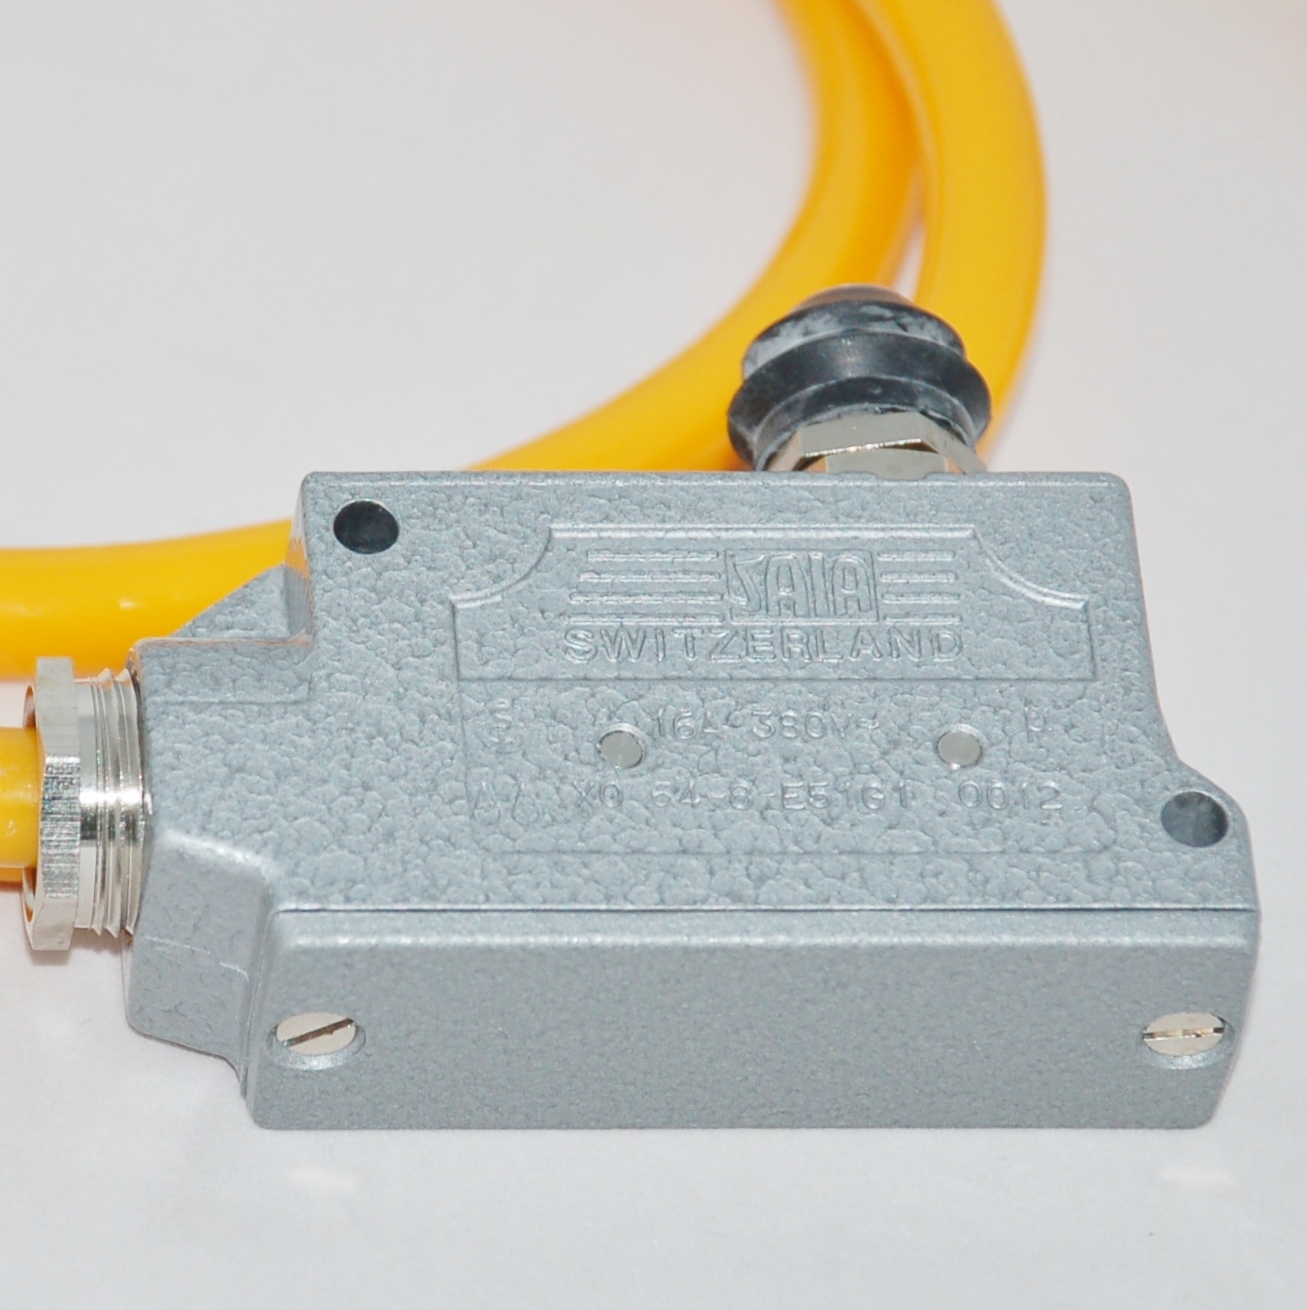 Saia 20a limit switch with sealed plunger